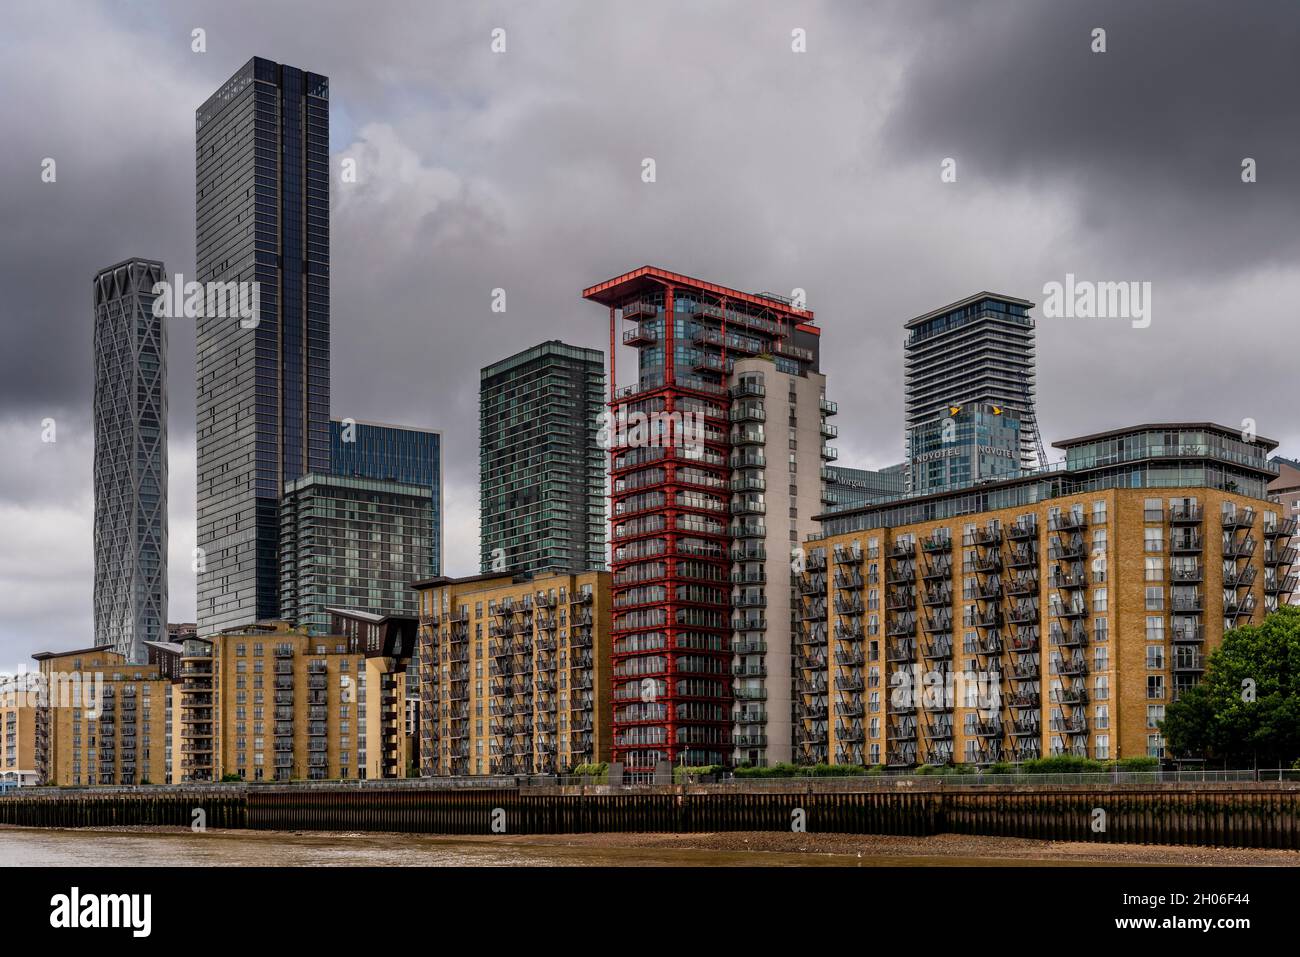 Residential Property On Canary Wharf, London, UK. Stock Photo